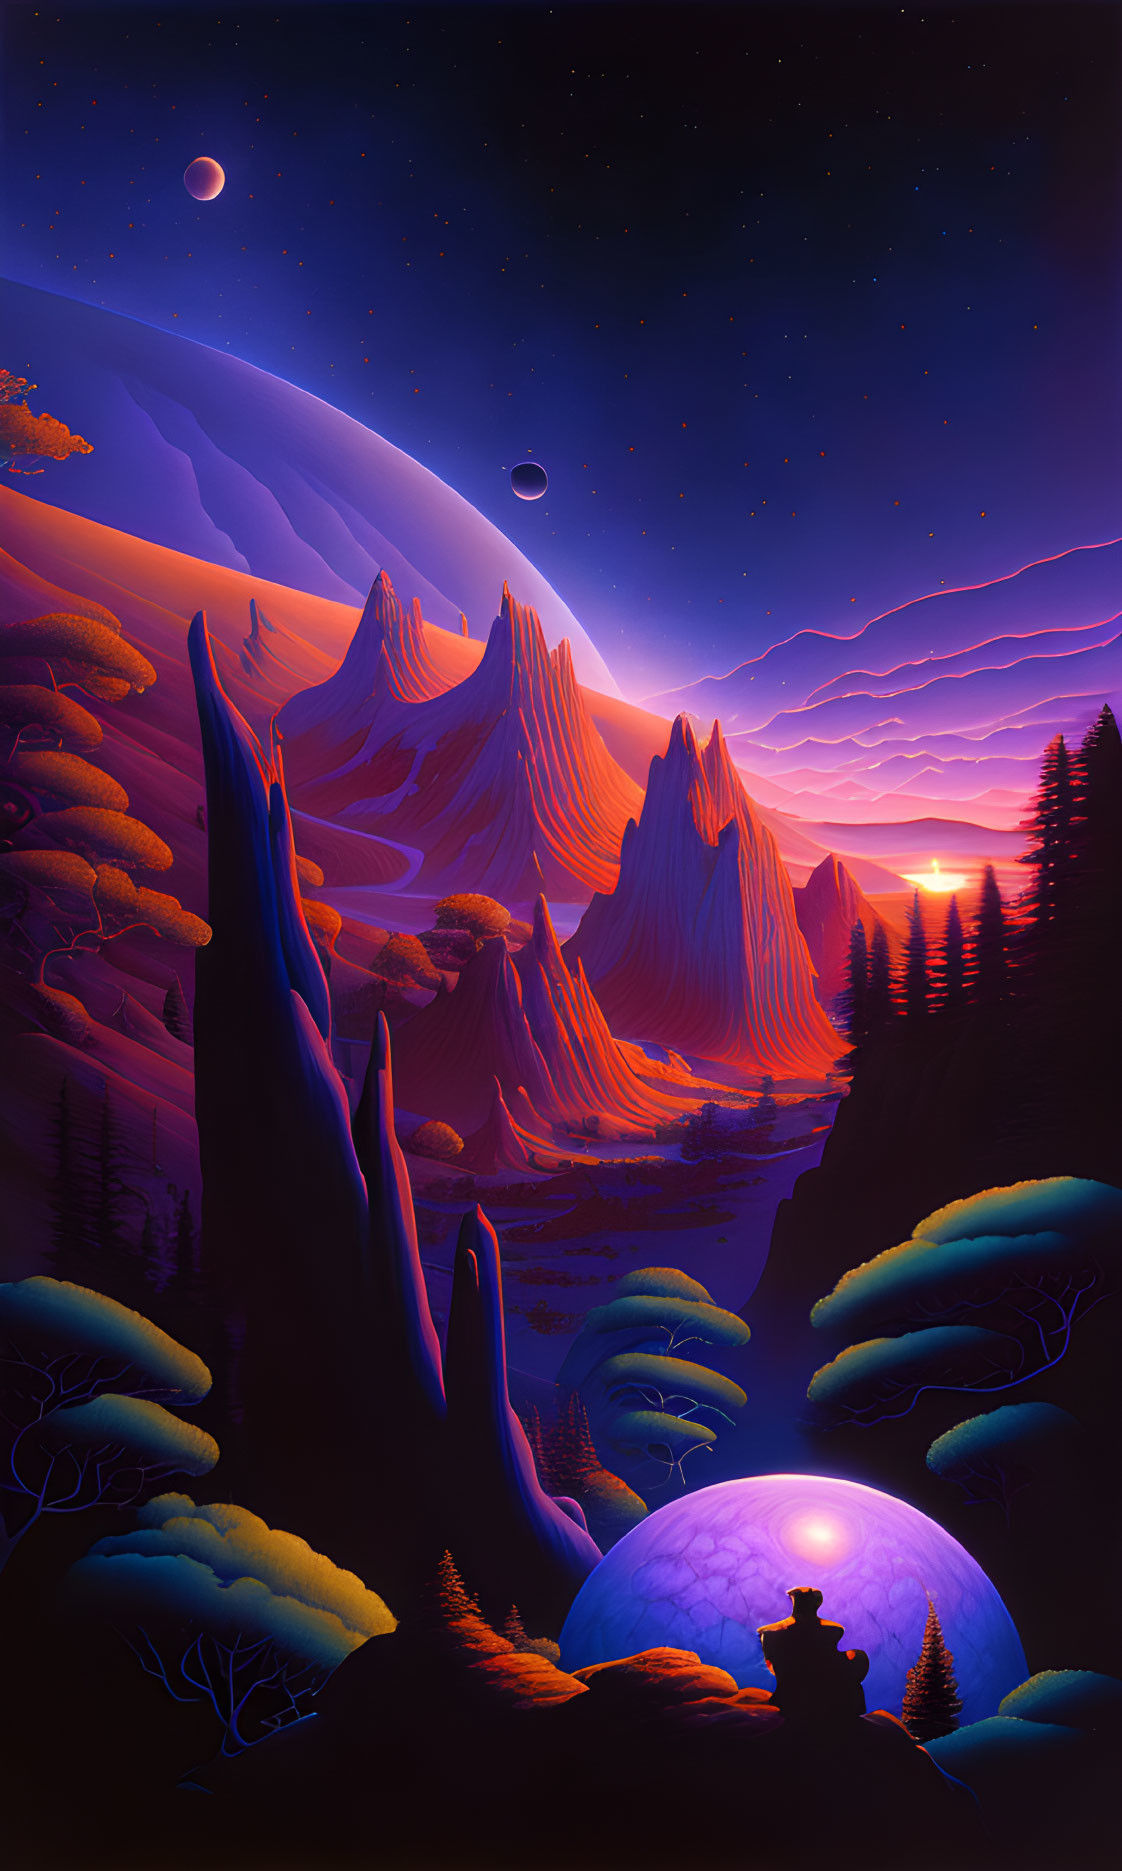 Surreal landscape digital art: mountains, orb, trees, starry sky, two moons